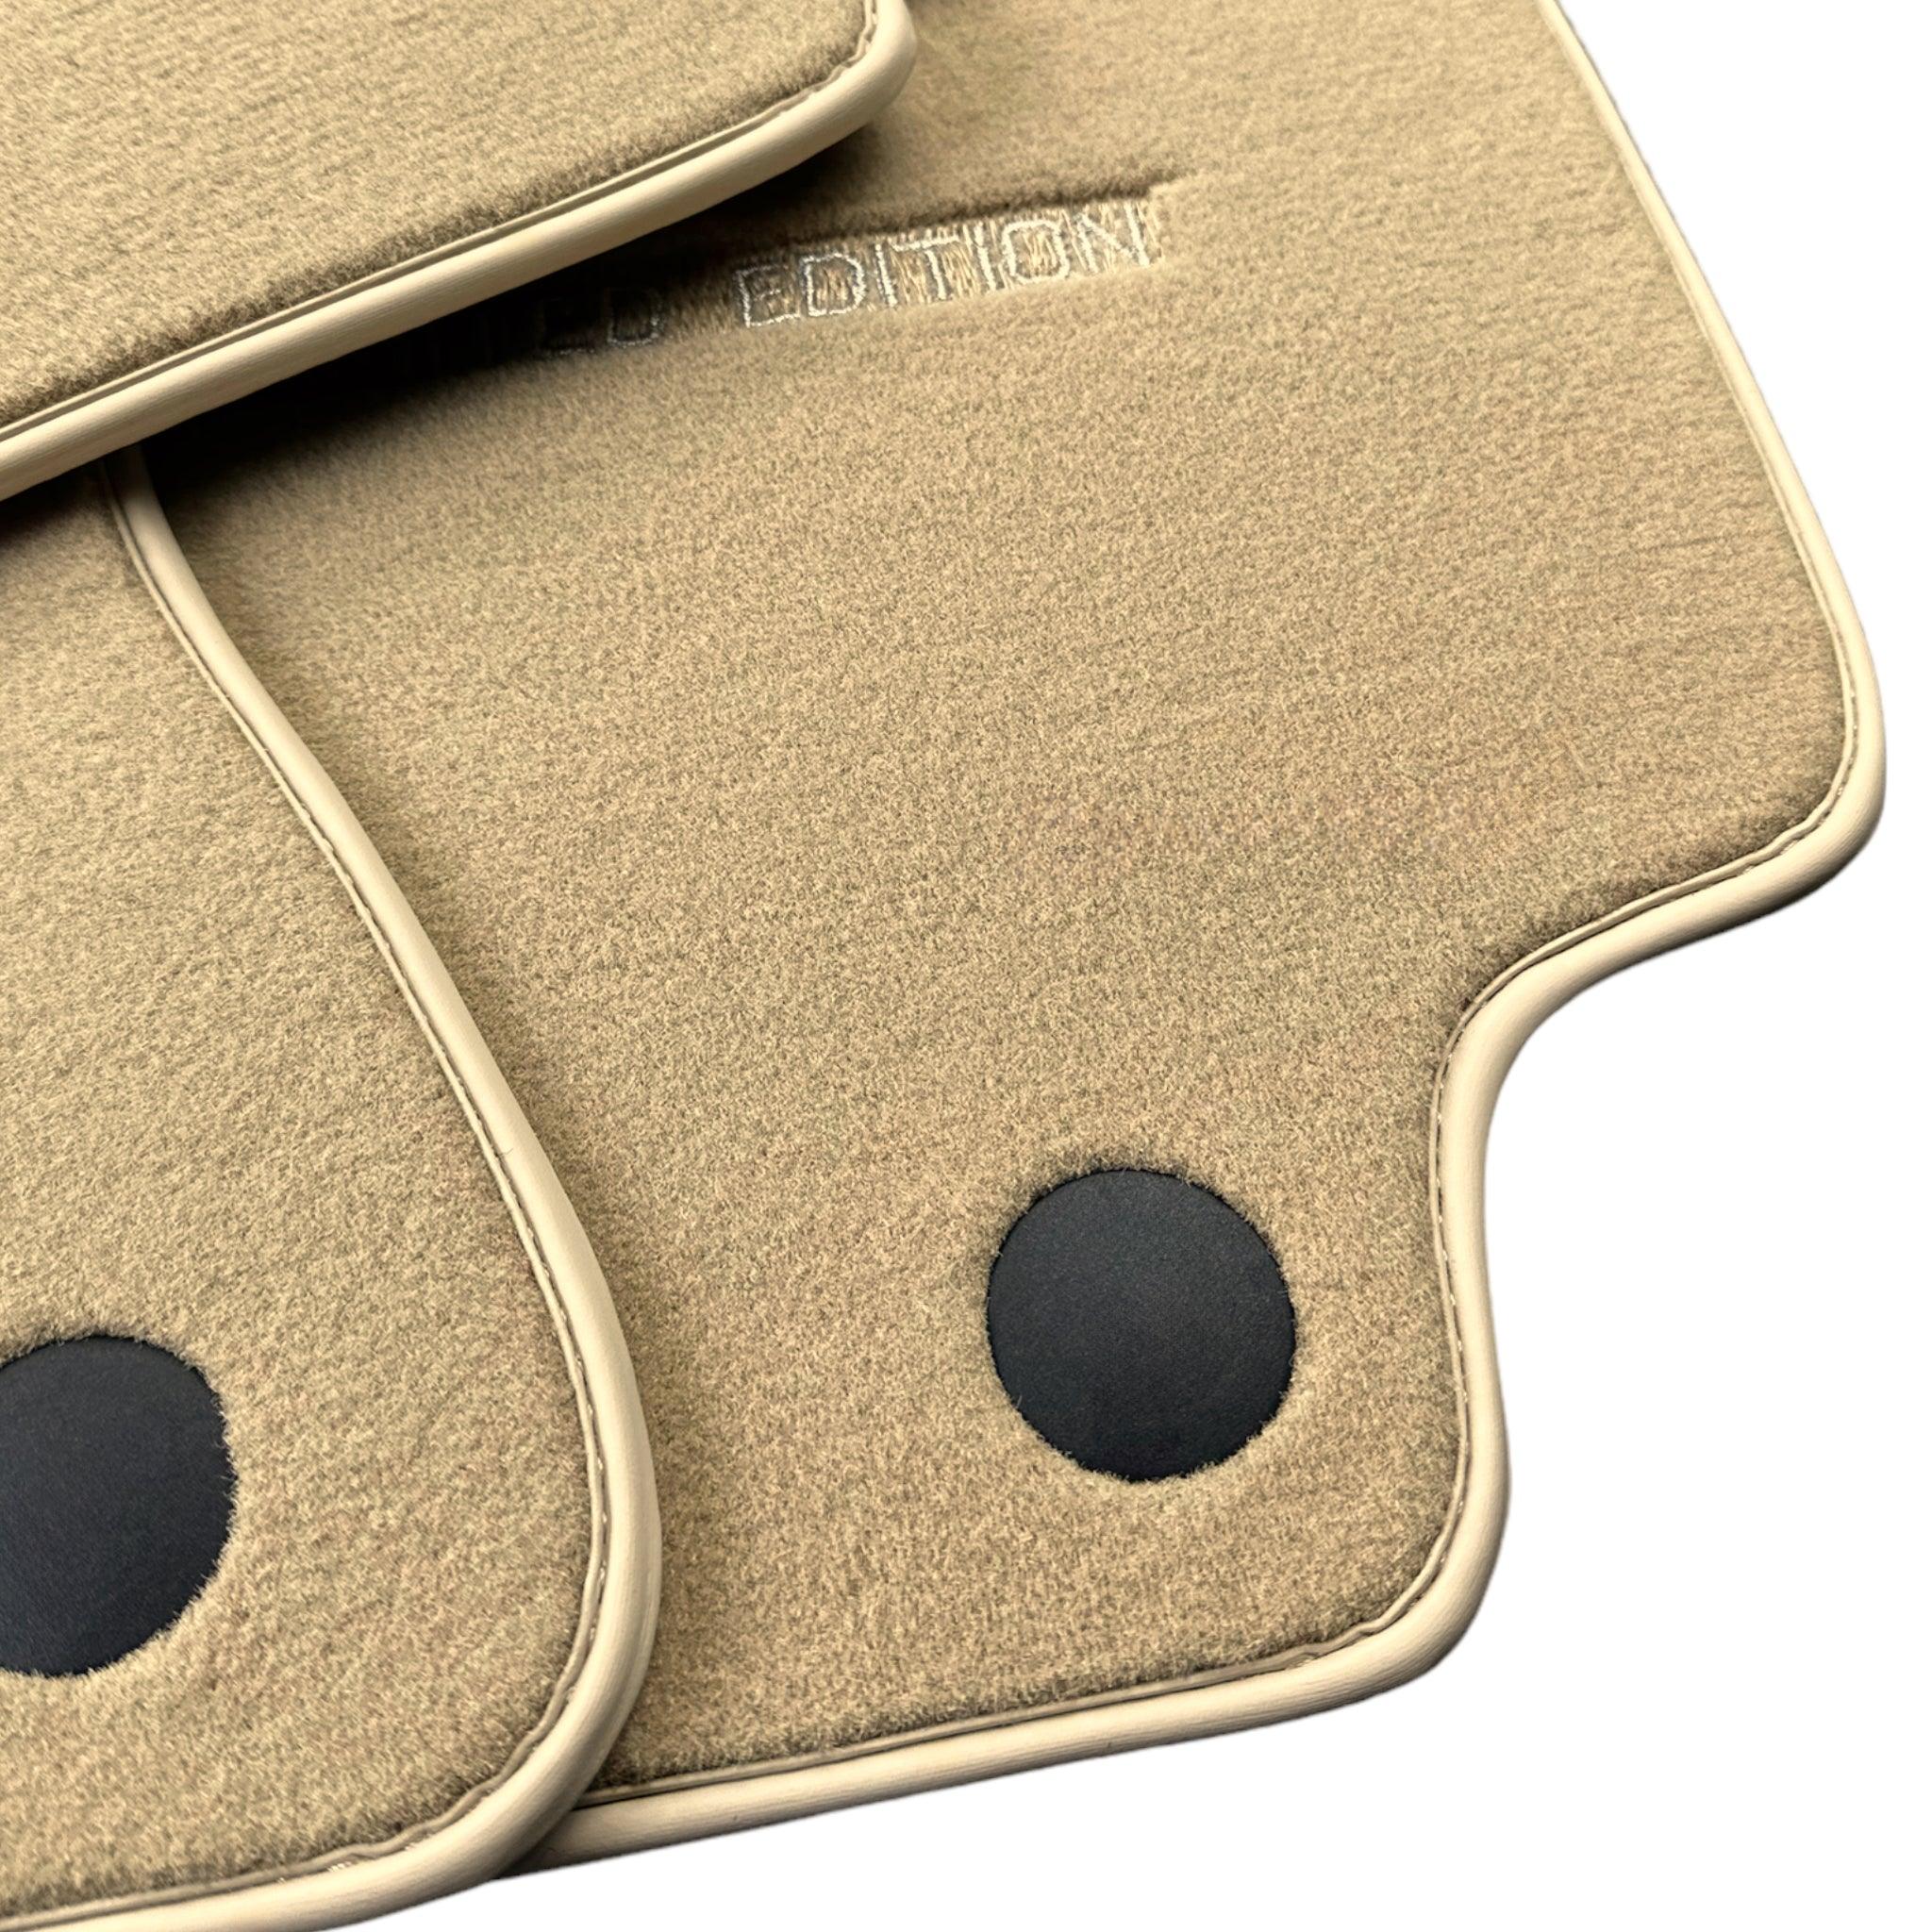 Beige Floor Mats For Mercedes Benz EQA-Class H243 (2021-2023) | Limited Edition